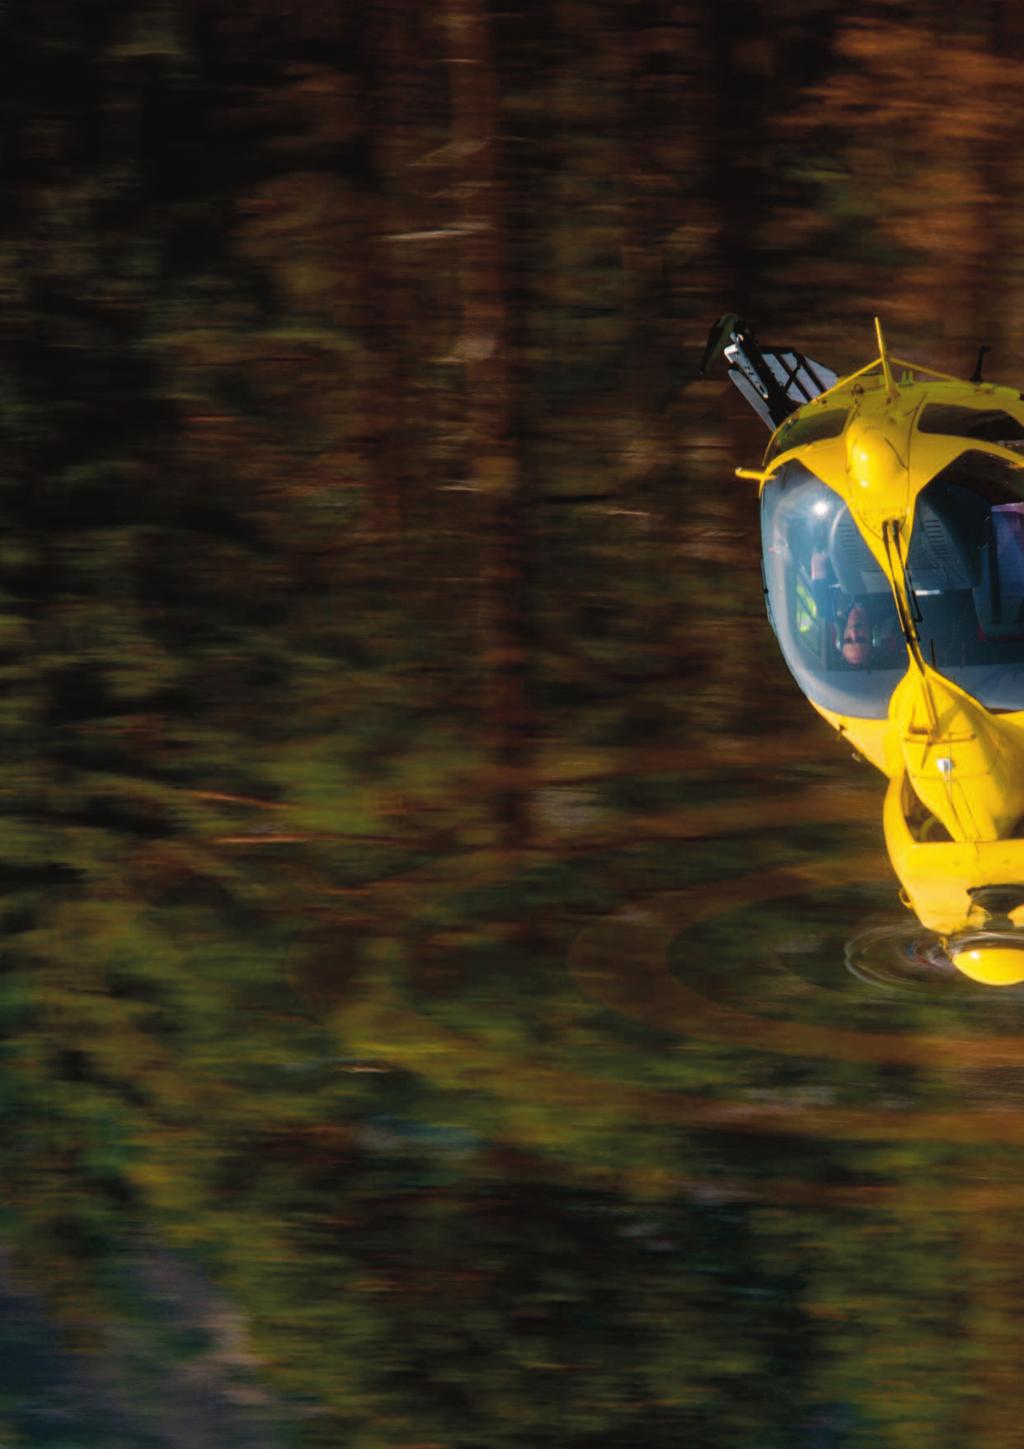 002 H145 A VERSATILE M U LT I - R O L E HELICOPTER, WITH DESIGNED-IN MISSION CAPABILITY AND FLEXIBILITY The H145 is the newest 4-ton-class lightweight twin-engine helicopter in Airbus Helicopters